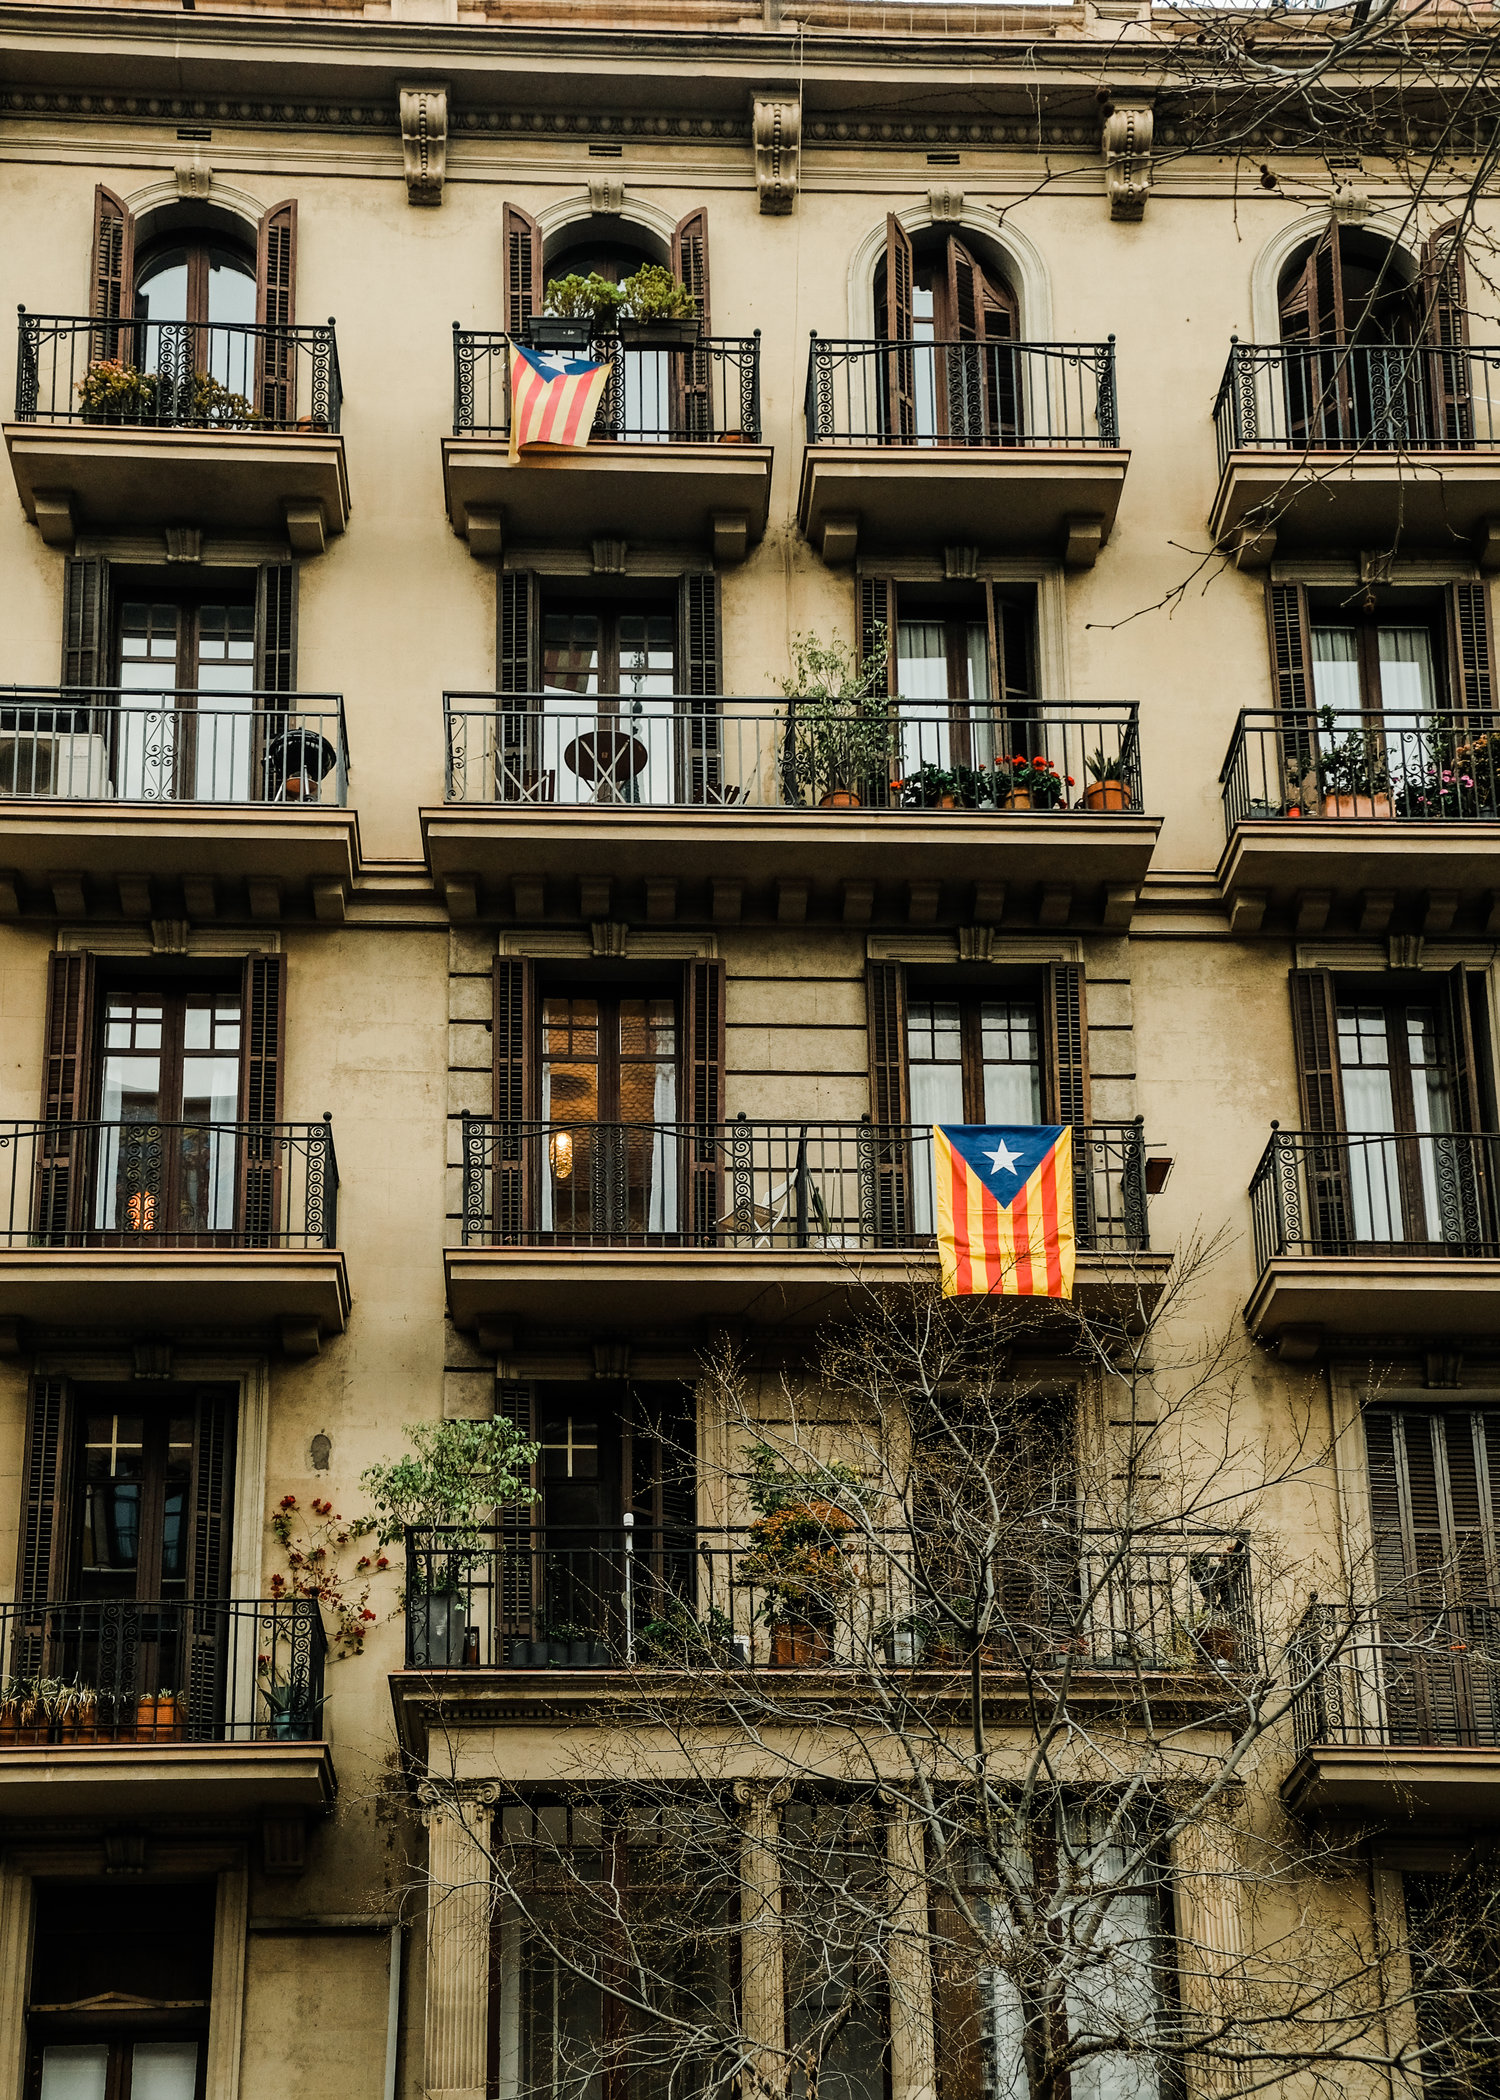  La Estelada Blava, the most popular flag that one will notice on display in Barcelona stands as the symbol of the separatist movement in Catalonia and represents their desire to gain independence from the rest of Spain. In a time as politically turb